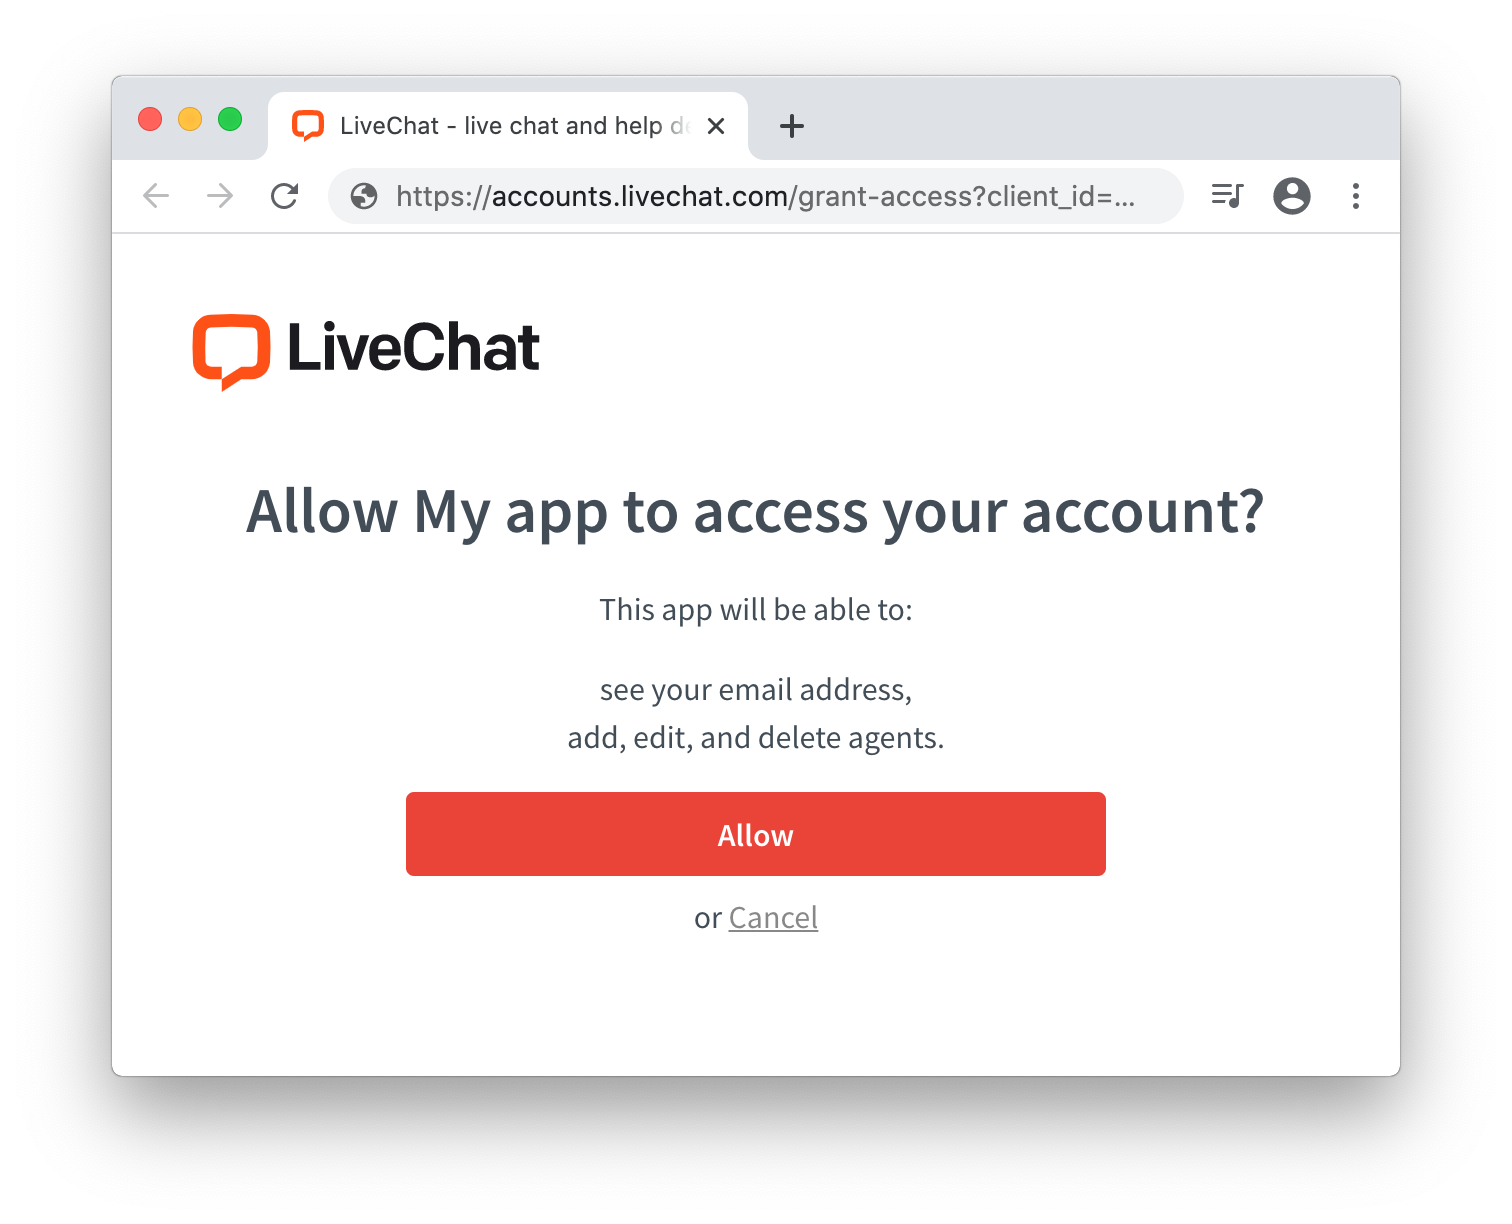 LiveChat Access Grant Request Modal